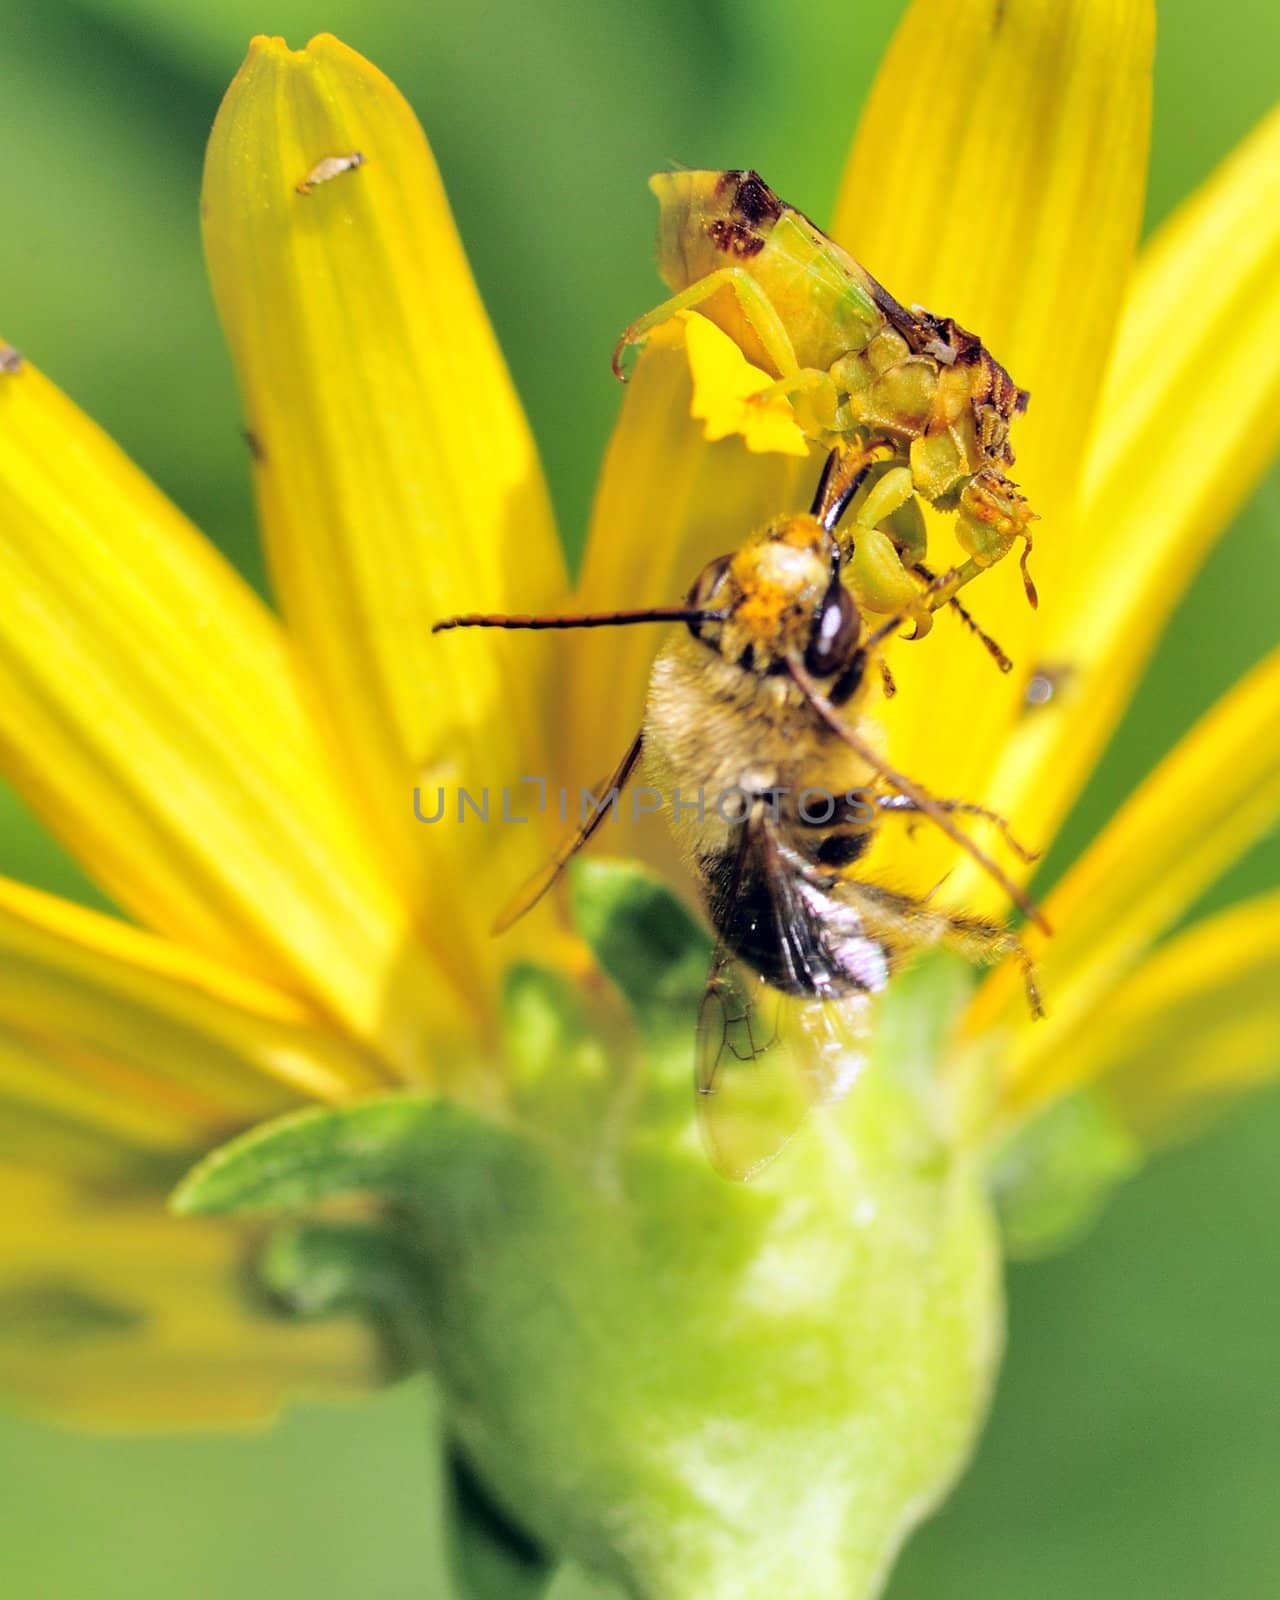 An Ambush Bug perched on a flower eating a bee.